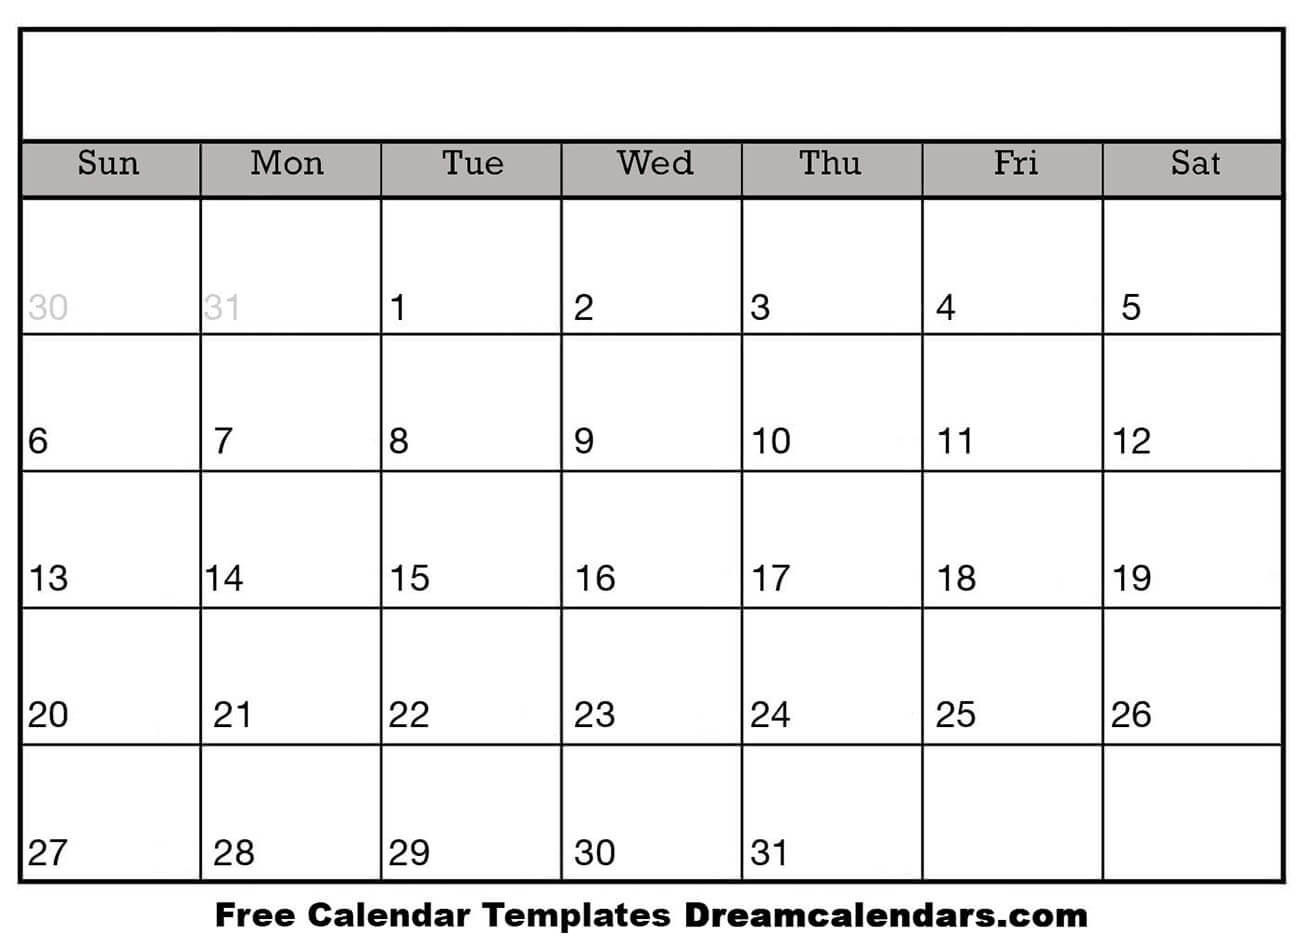 Get Printable Calendar Time And Date.com Pictures